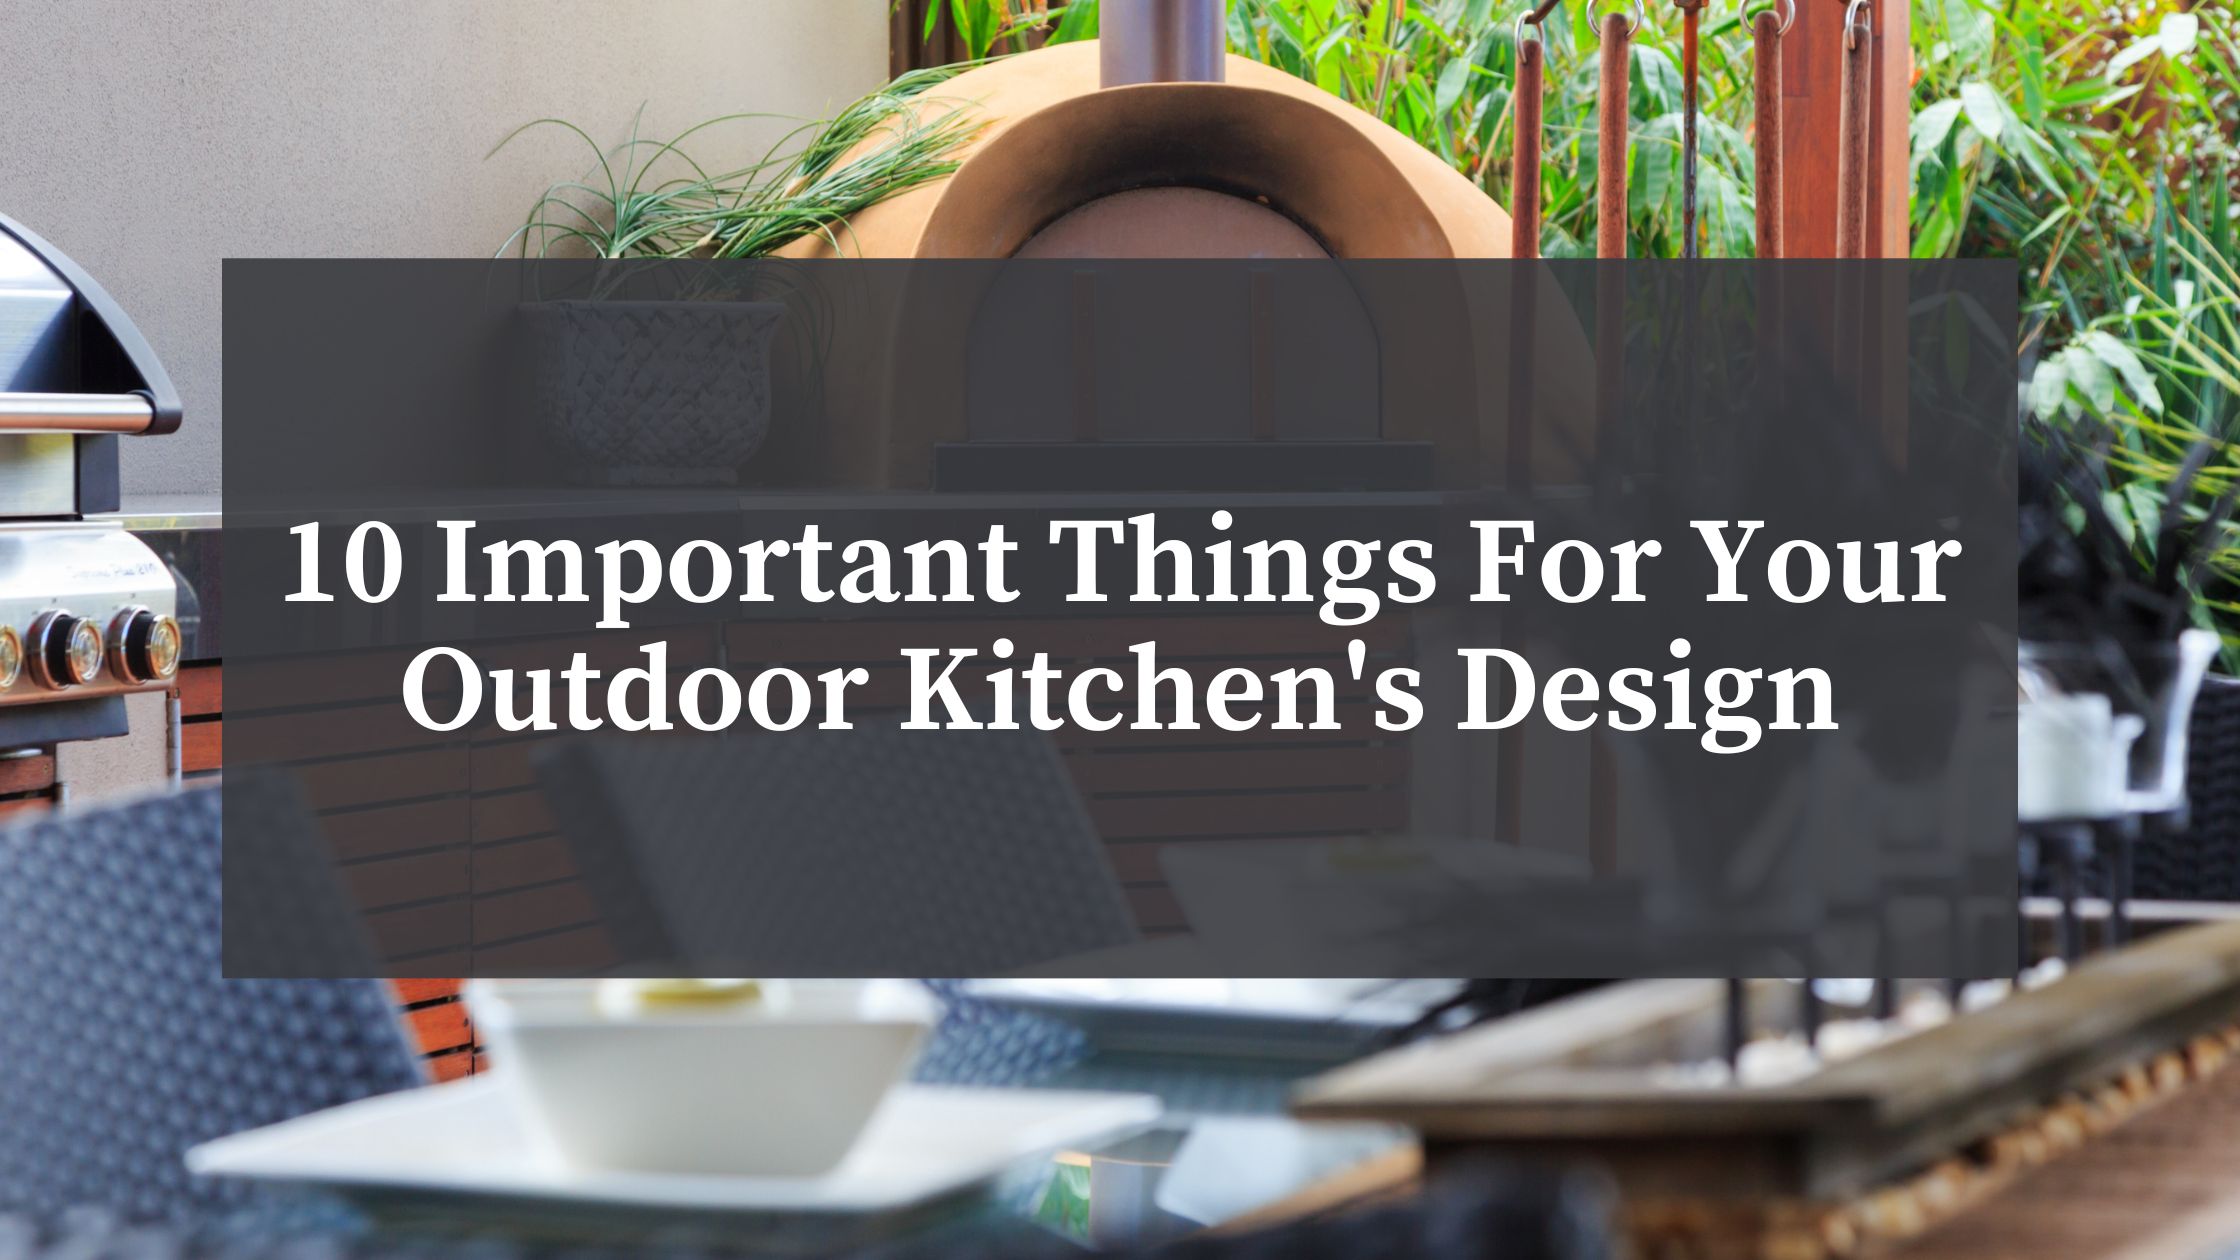 outdoor kitchens design with a wood fired oven and grill with dining and outdoor chairs